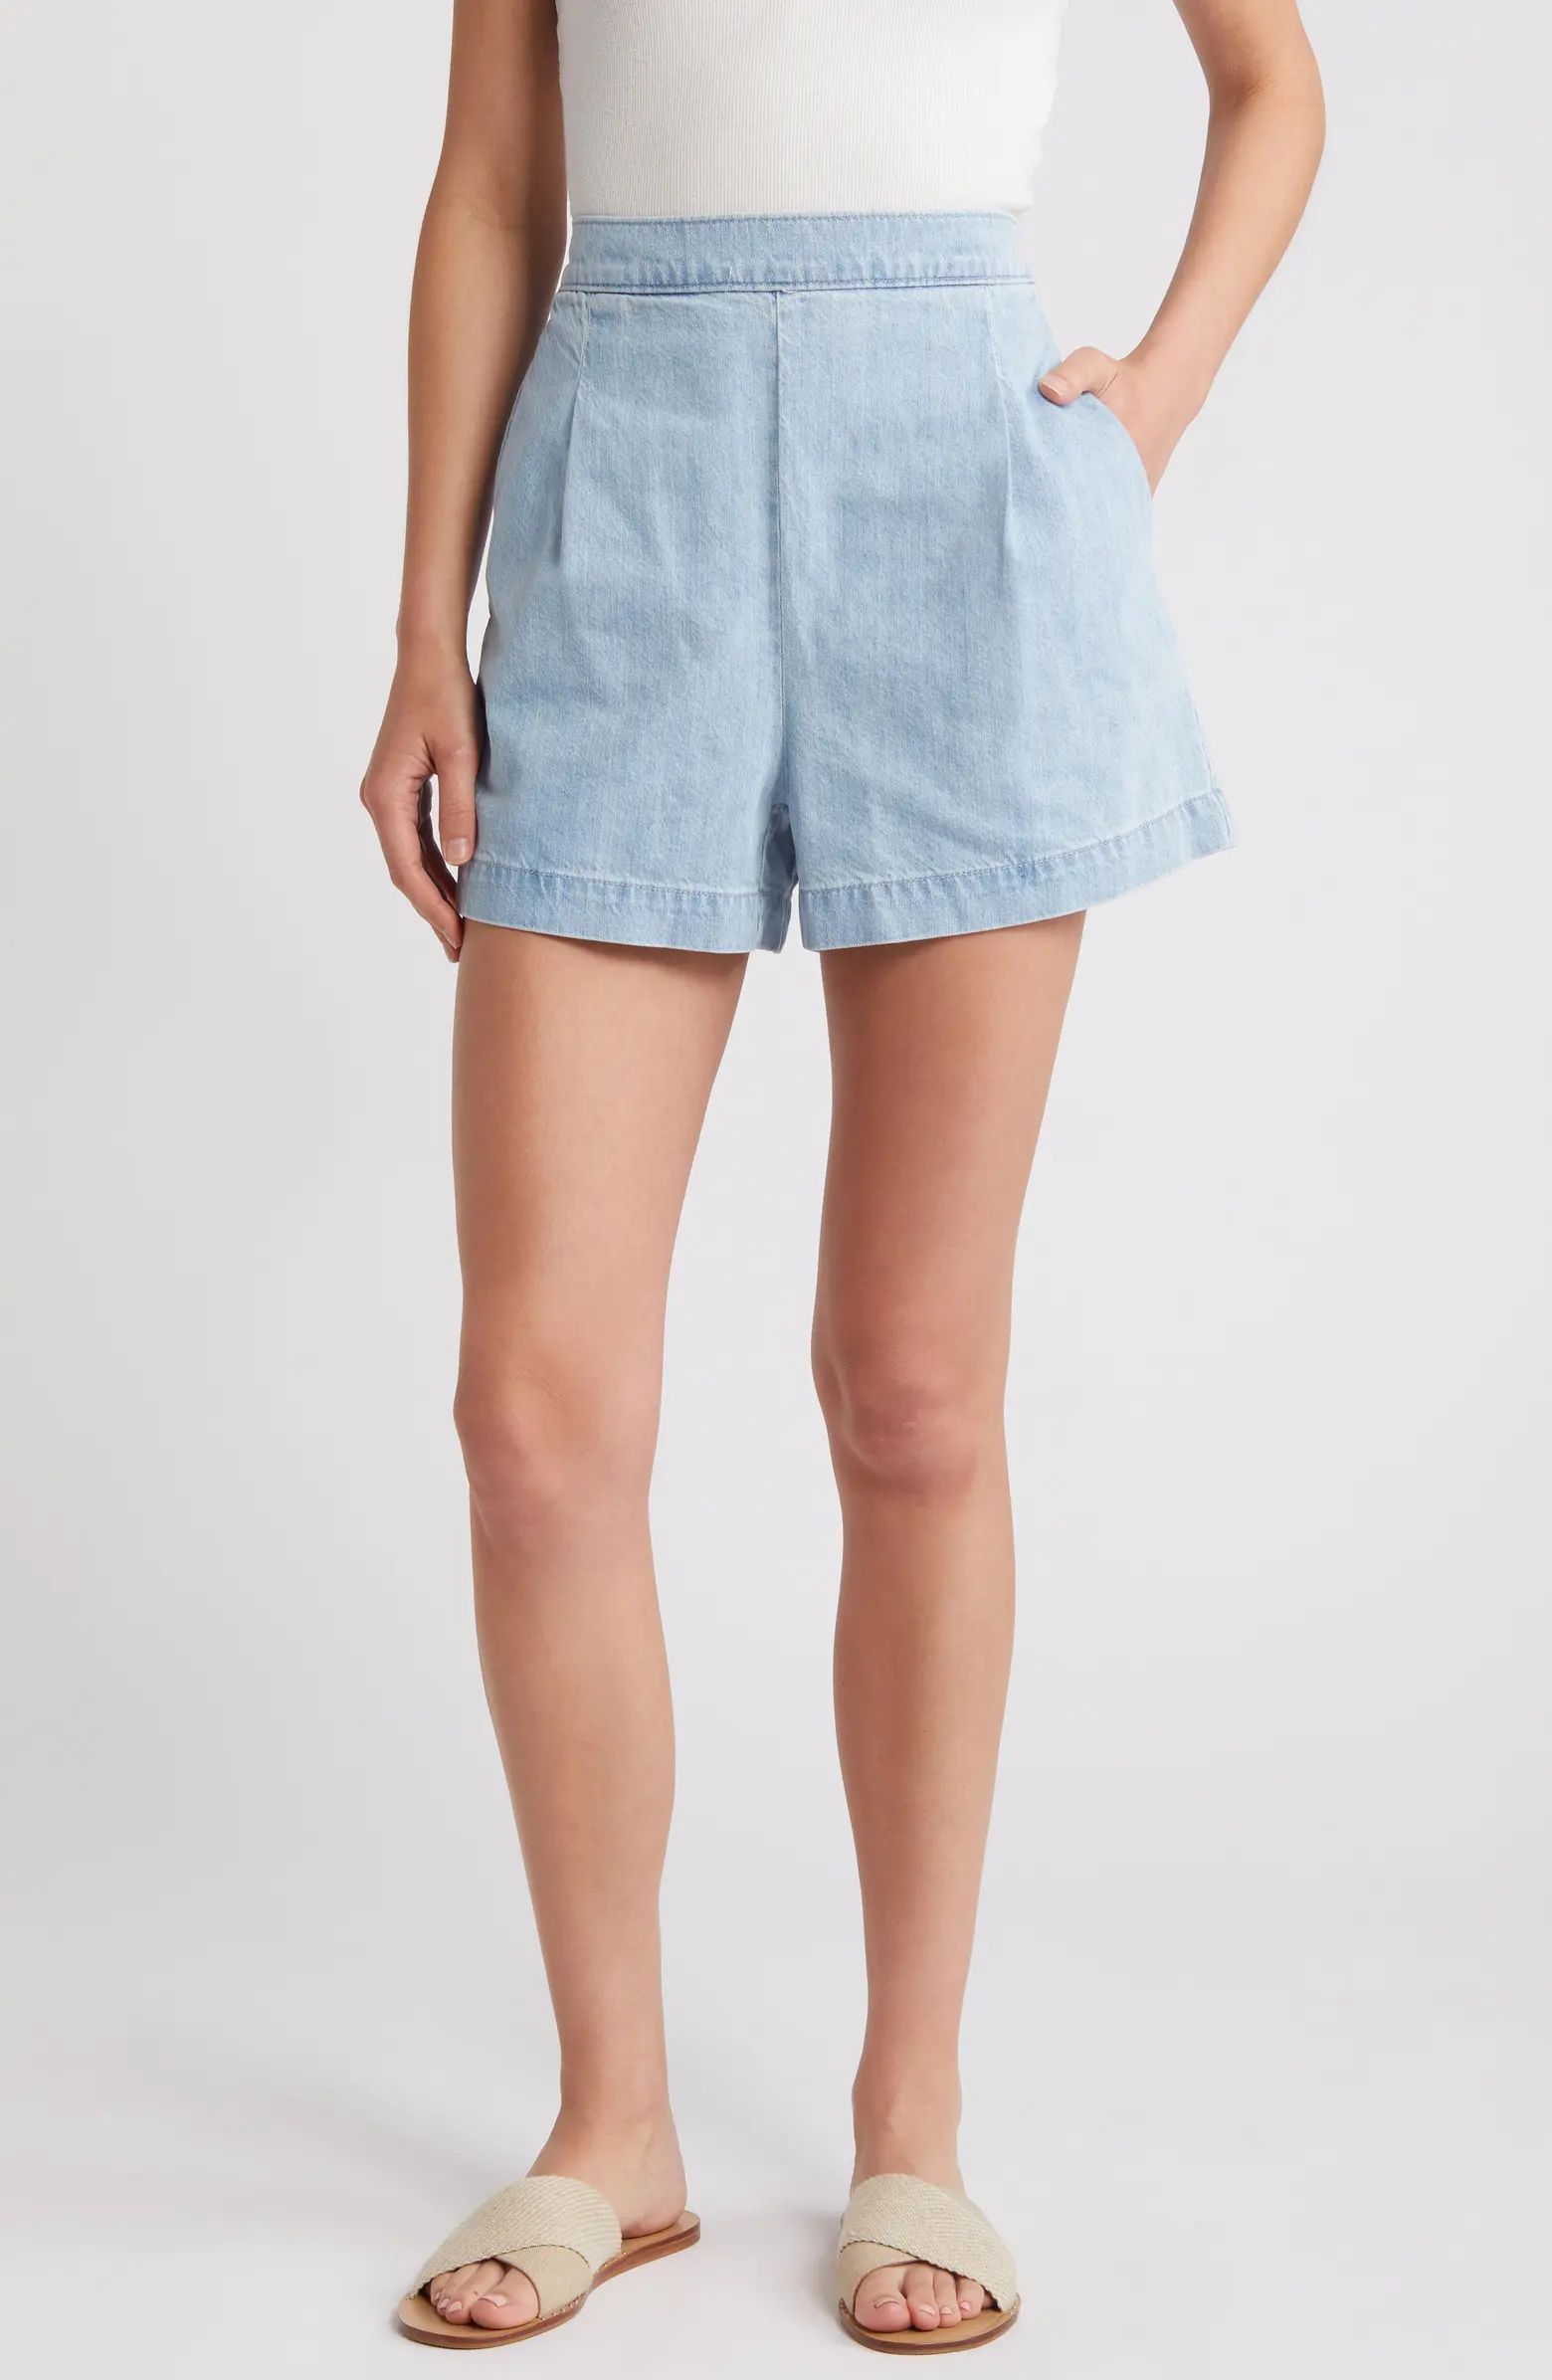 Madewell Clean Denim Pull-On Shorts | Nordstrom | Nordstrom